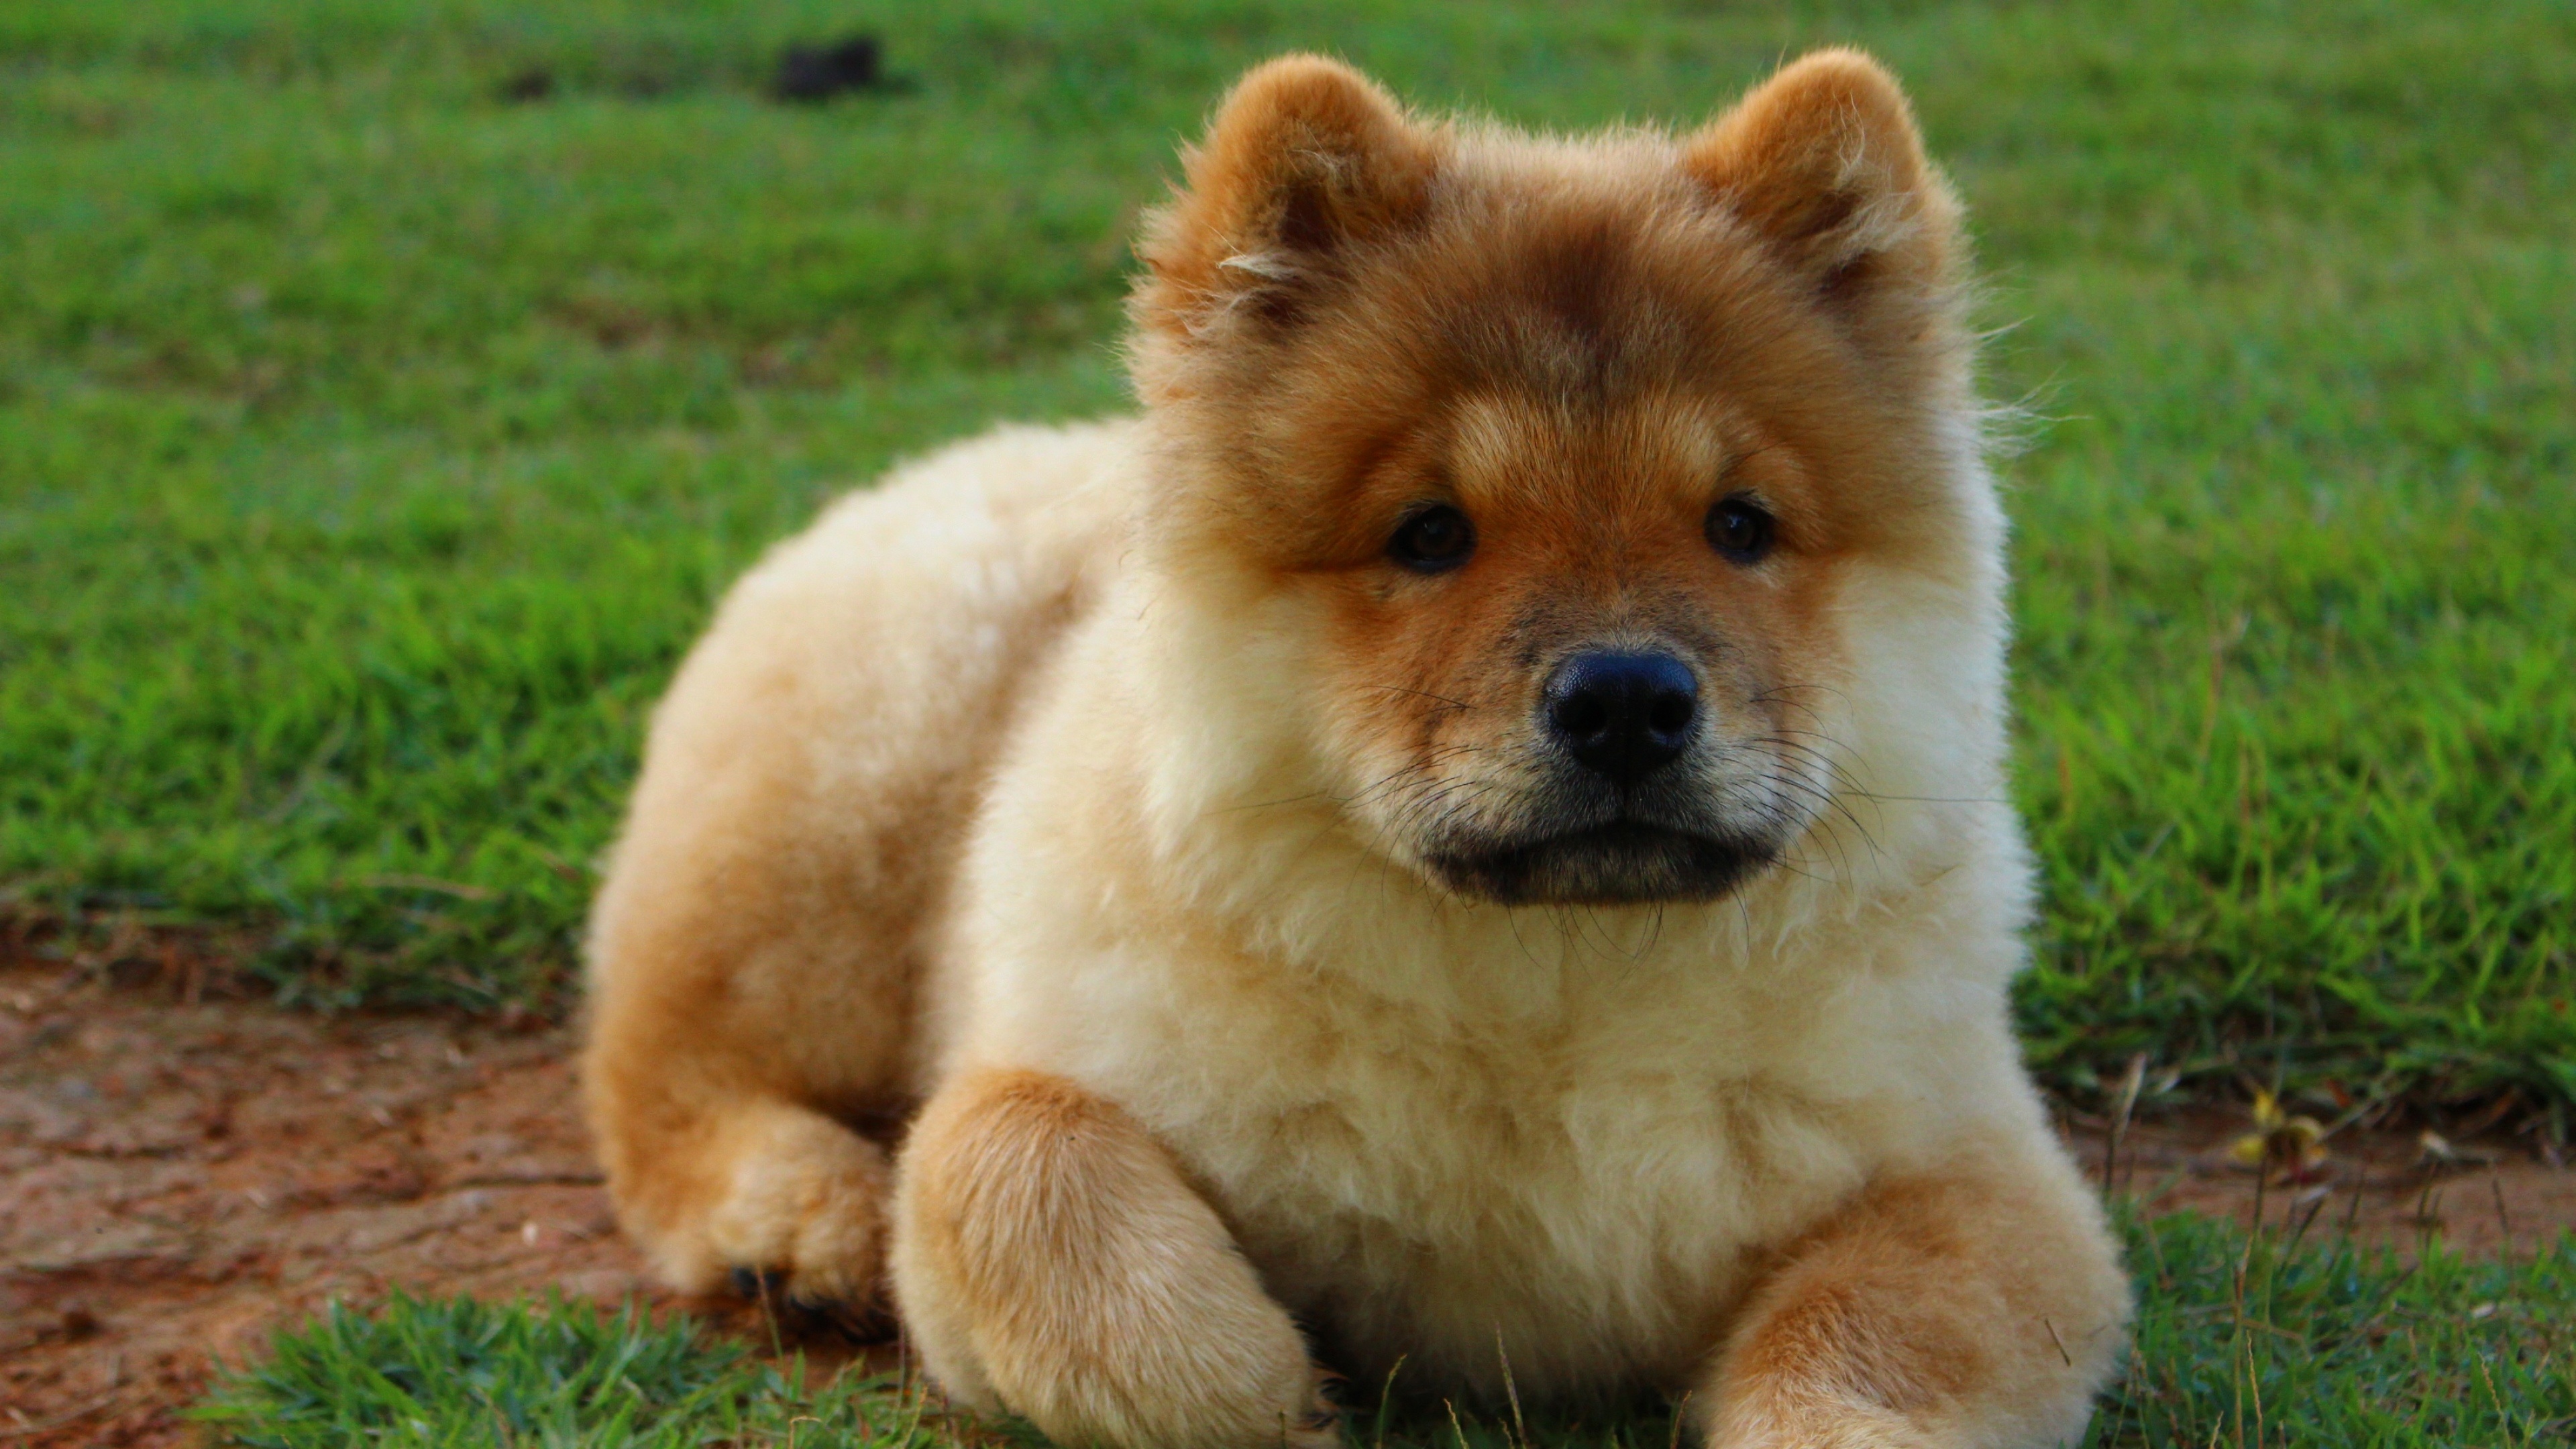 Dog breeds, Customizable theme pack, Chow Chow included, 3840x2160 4K Desktop